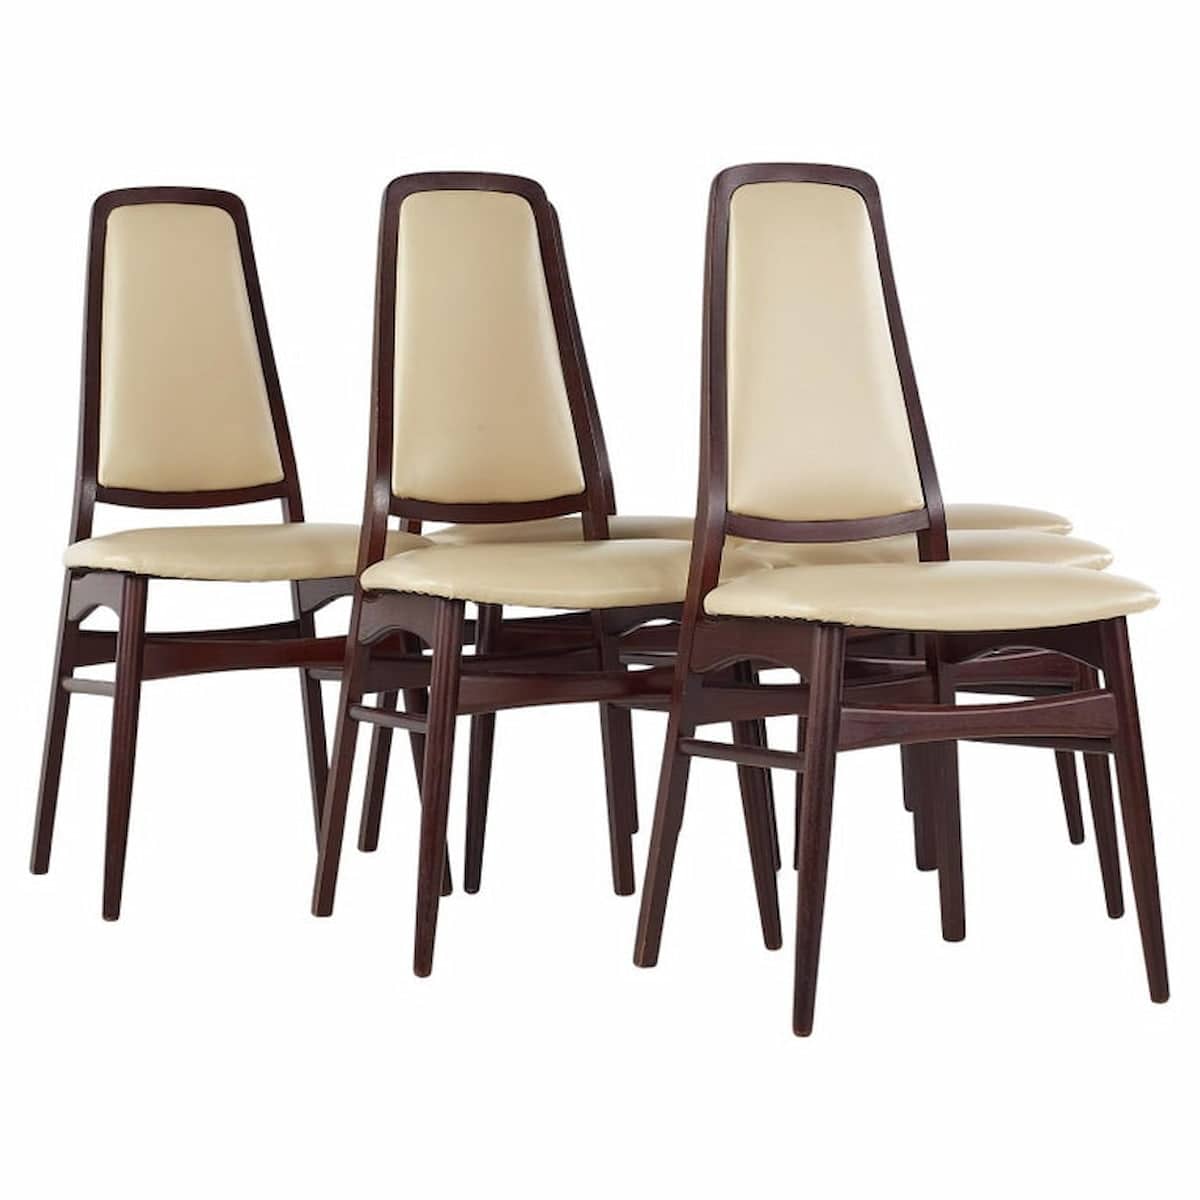 Dyrlund Style Mid Century Rosewood Dining Chairs - Set of 6